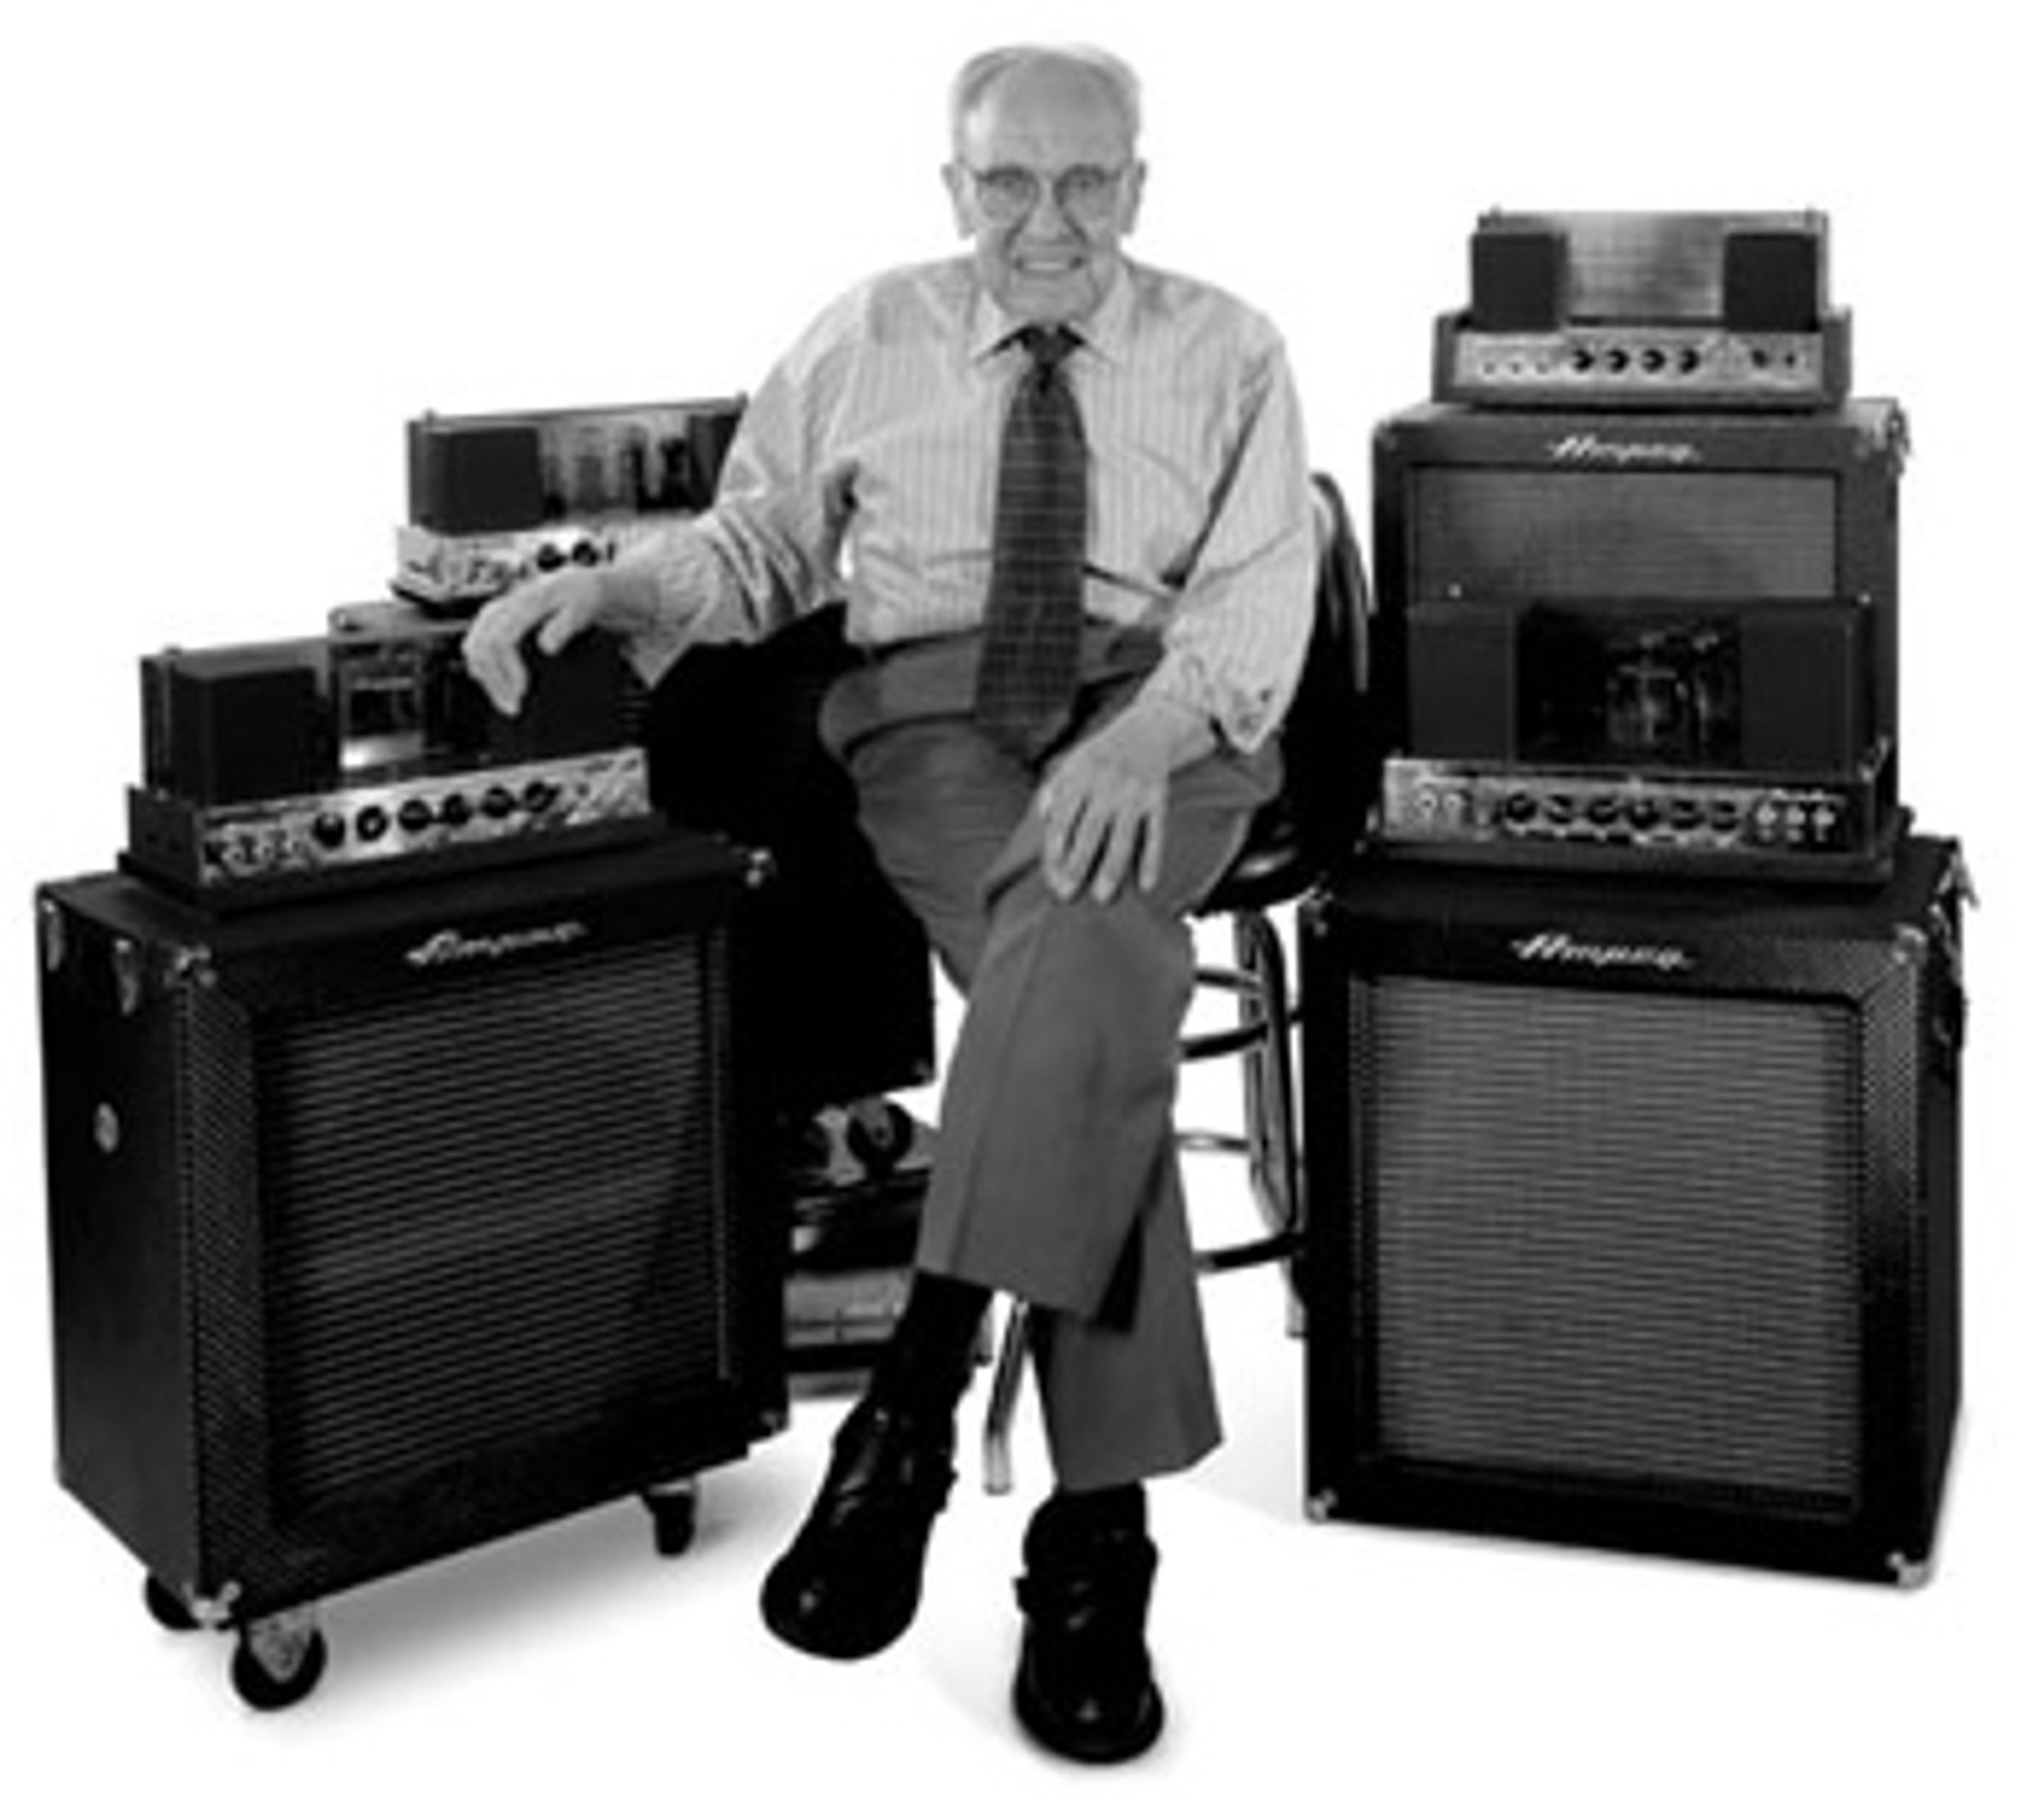 Remembering Jess Oliver, Inventor of the Ampeg B-15